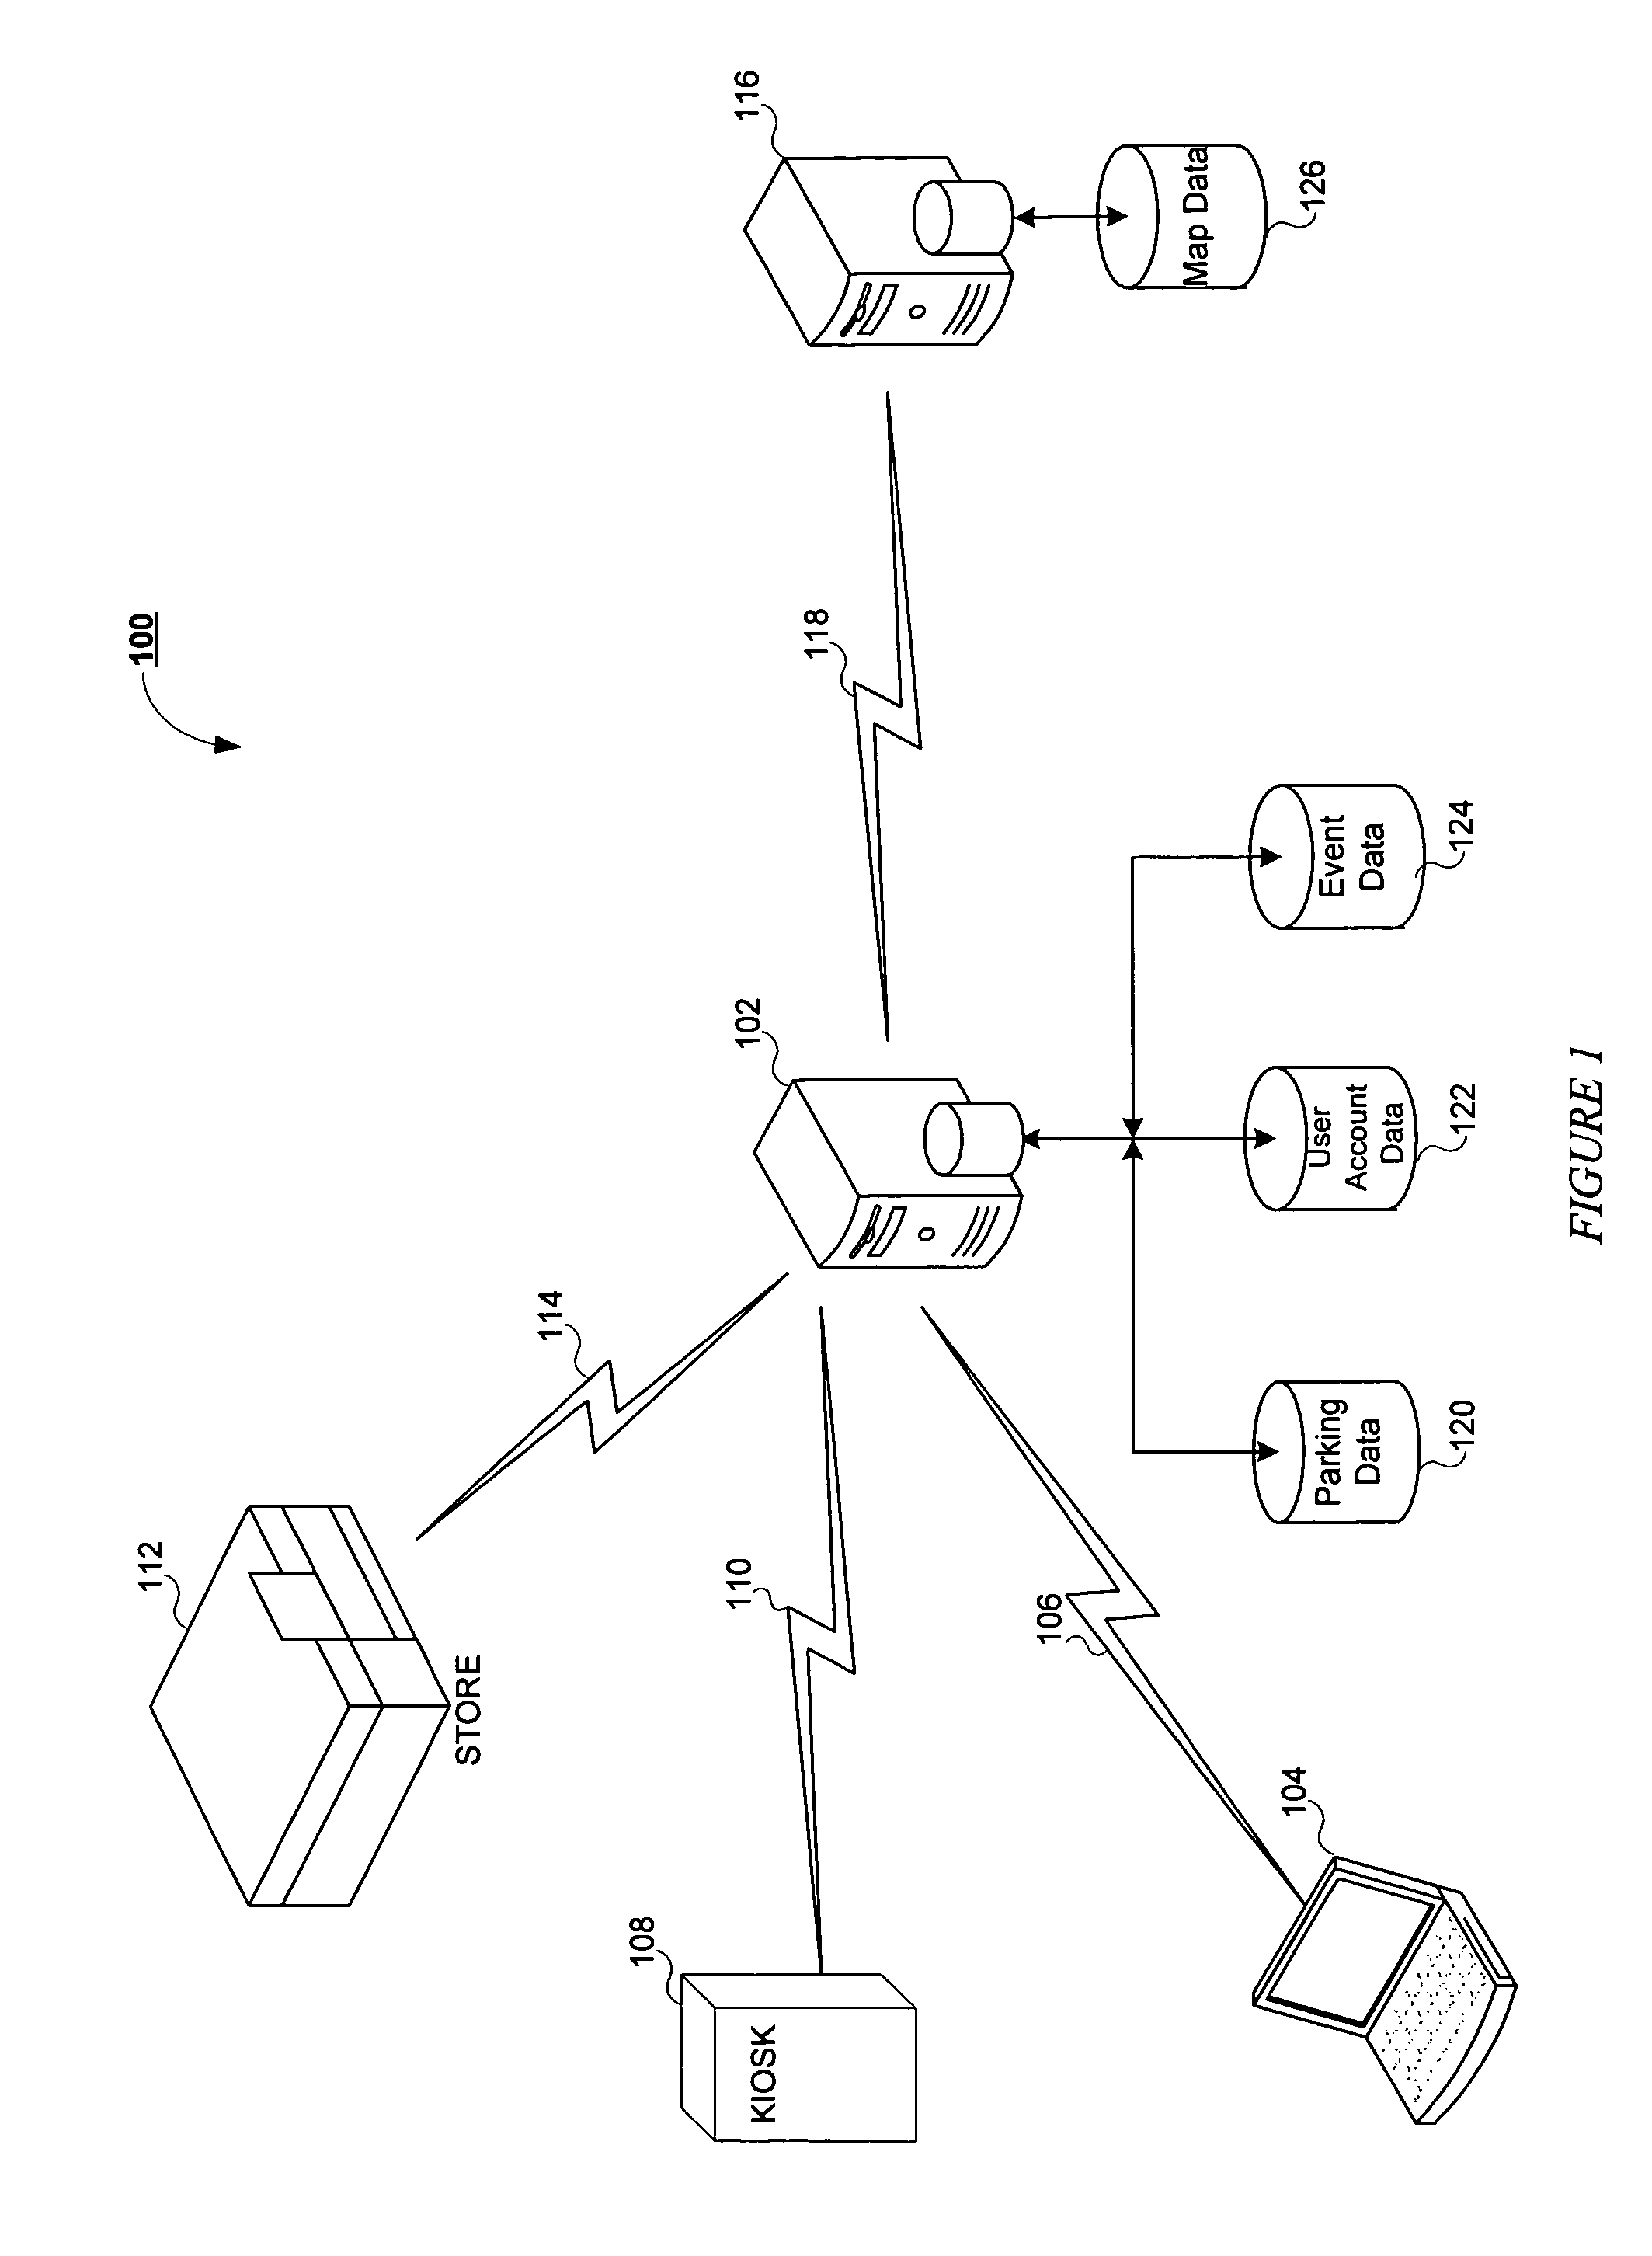 Web-based parking and traffic management system and method